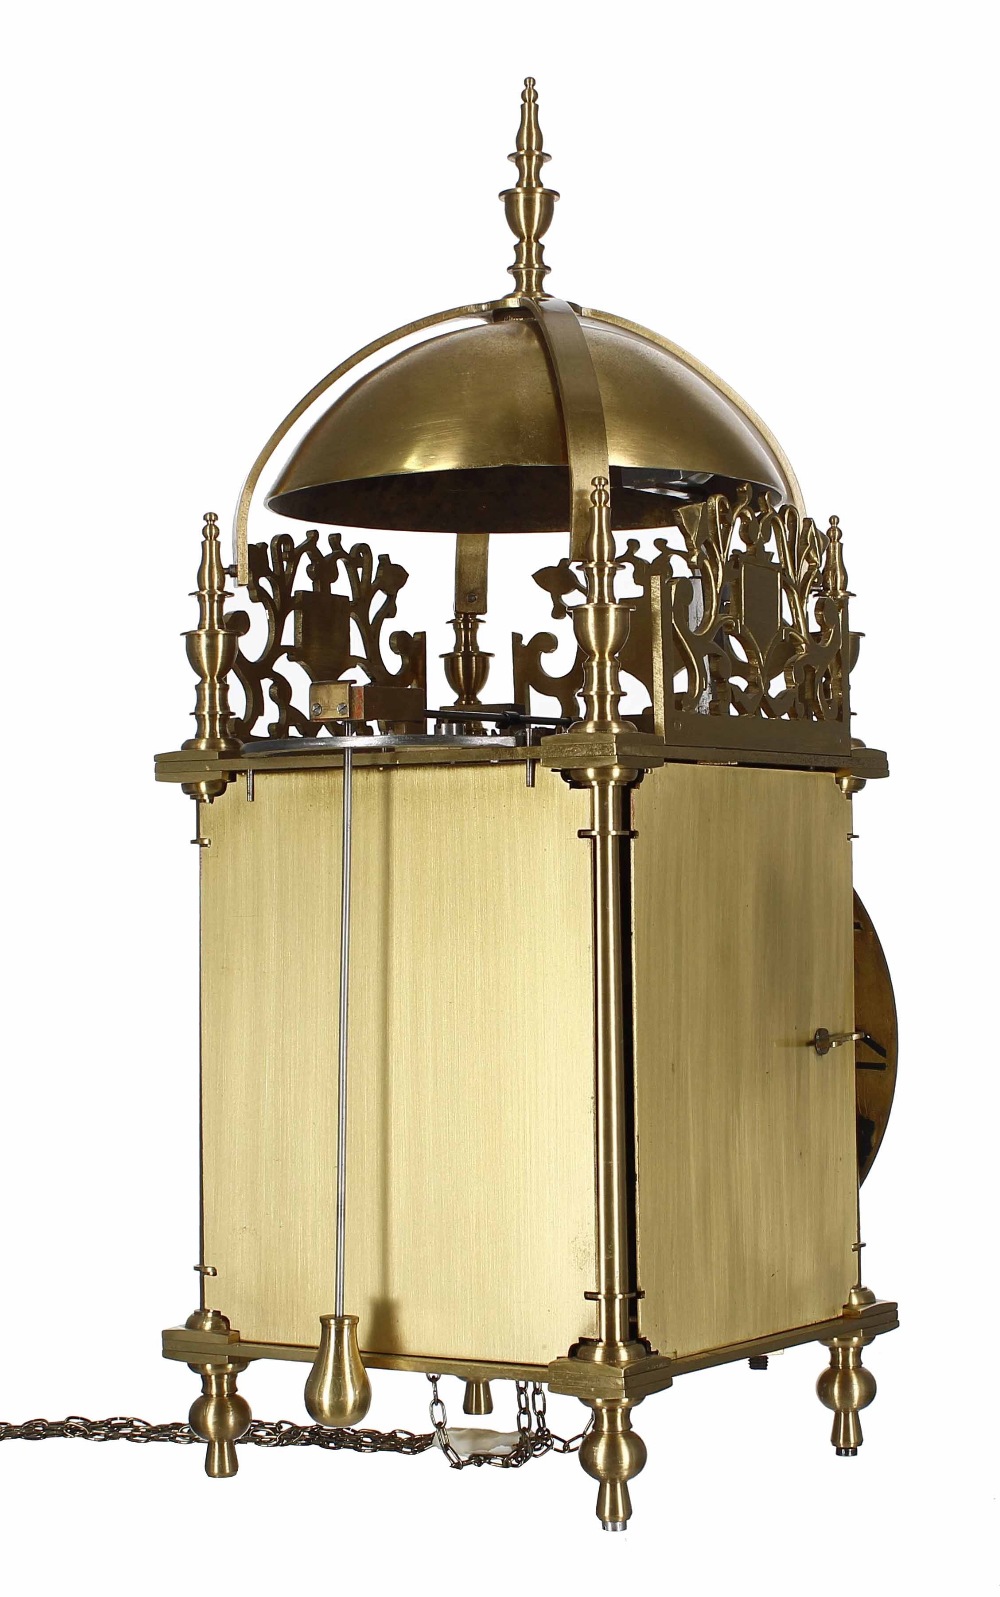 Contemporary brass verge lantern clock signed Peter Mairavers, Nantwich on the front fret, over a - Image 4 of 5